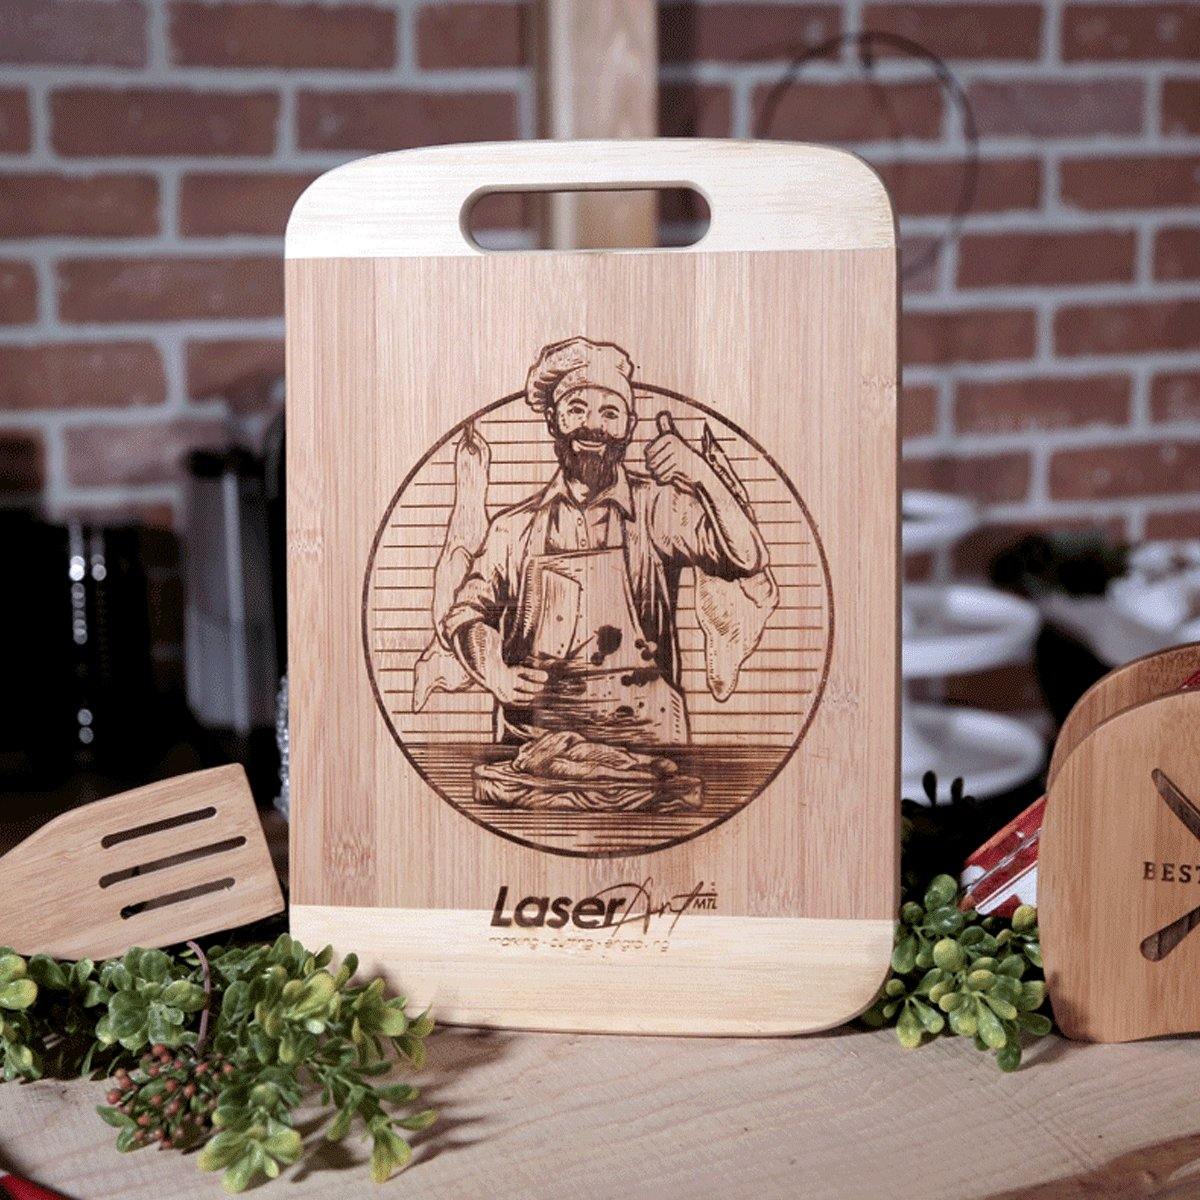 Personalized cutting board bamboo engraved - Laser Art MTL